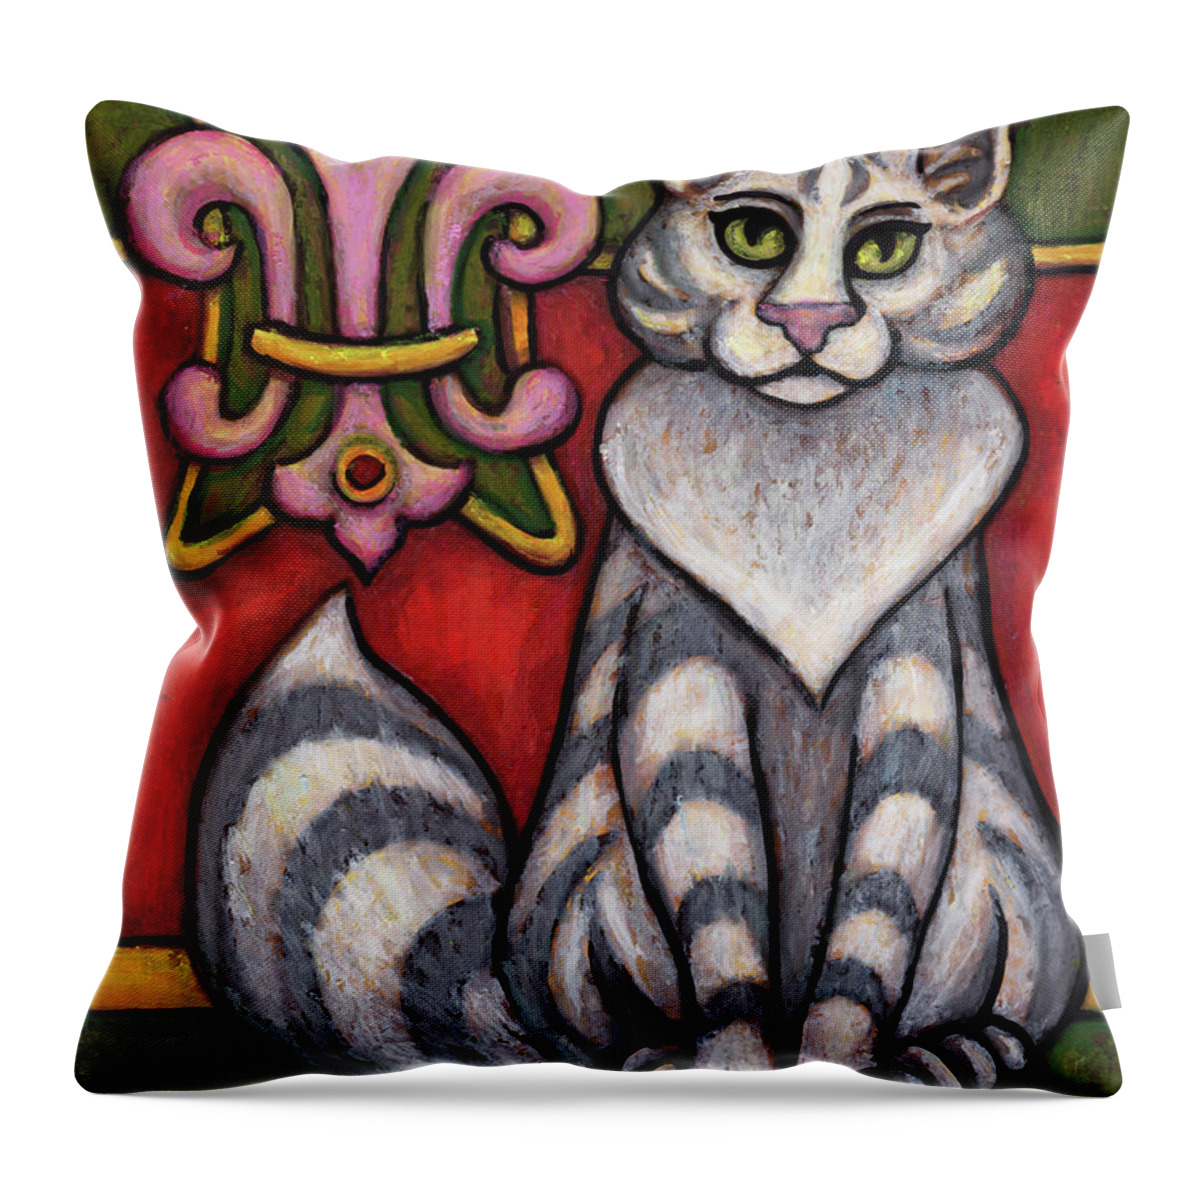 Cat Portrait Throw Pillow featuring the painting Harper. The Hauz Katz. Cat Portrait Painting Series. by Amy E Fraser